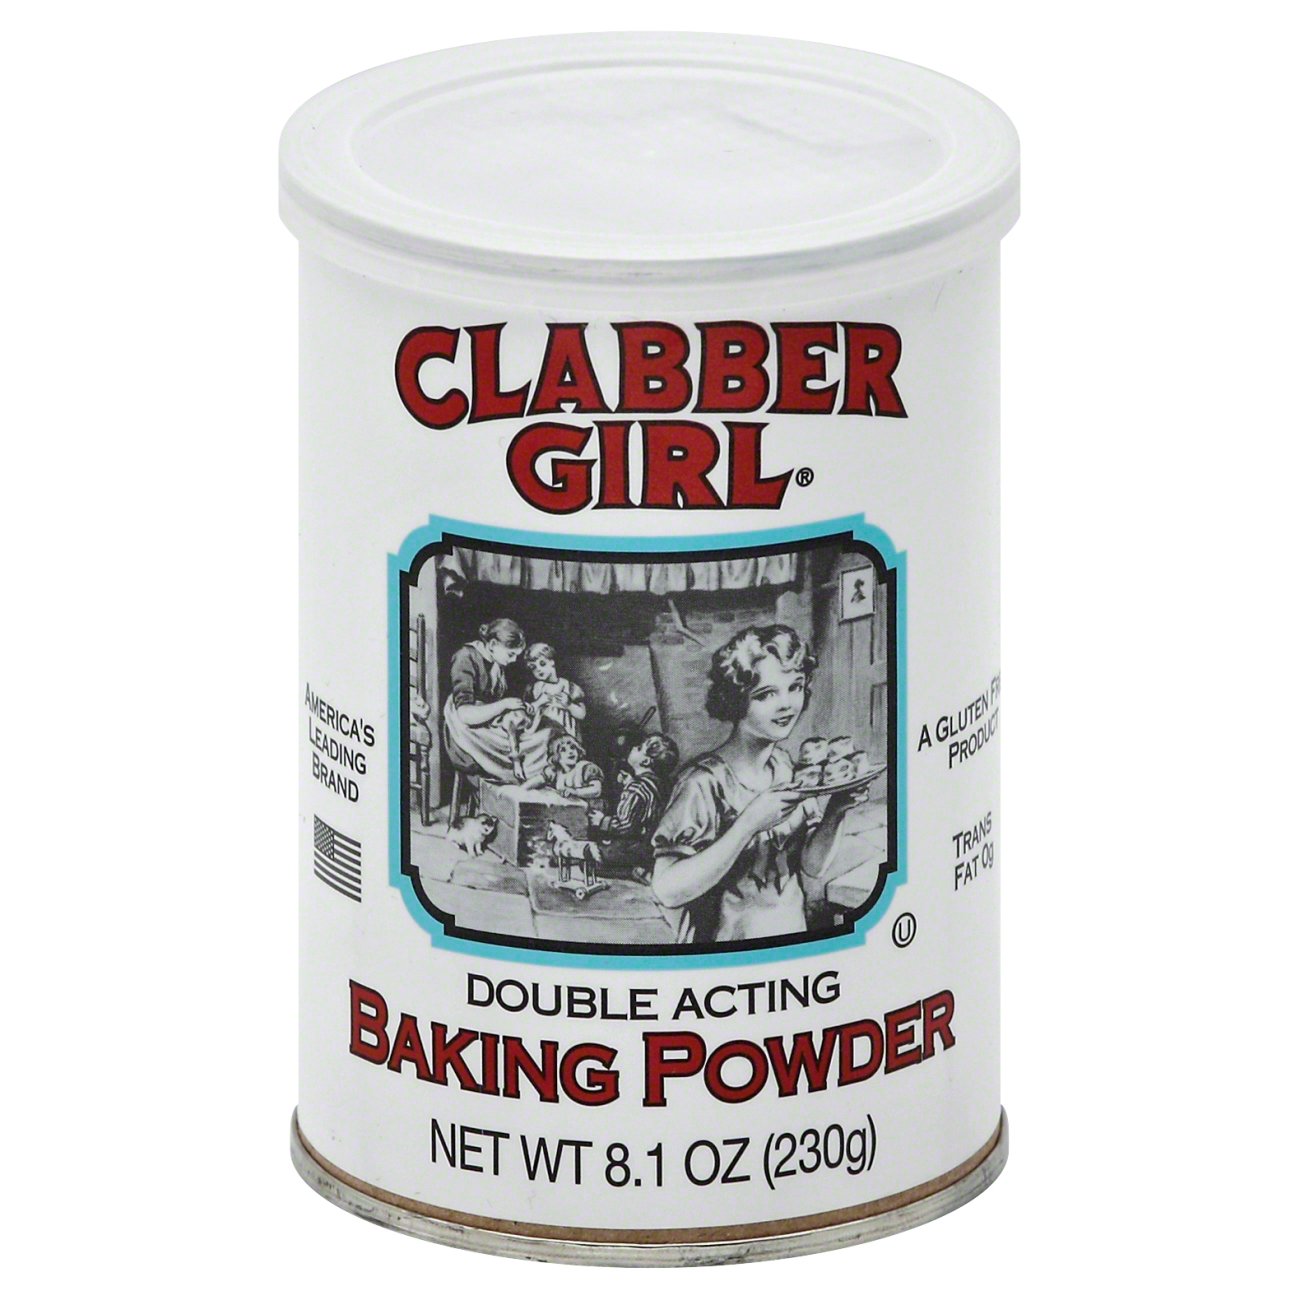 Clabber Girl Double Acting Baking Powder Shop Baking Soda Powder At H E B,How To Clean A Disgusting Bathtub